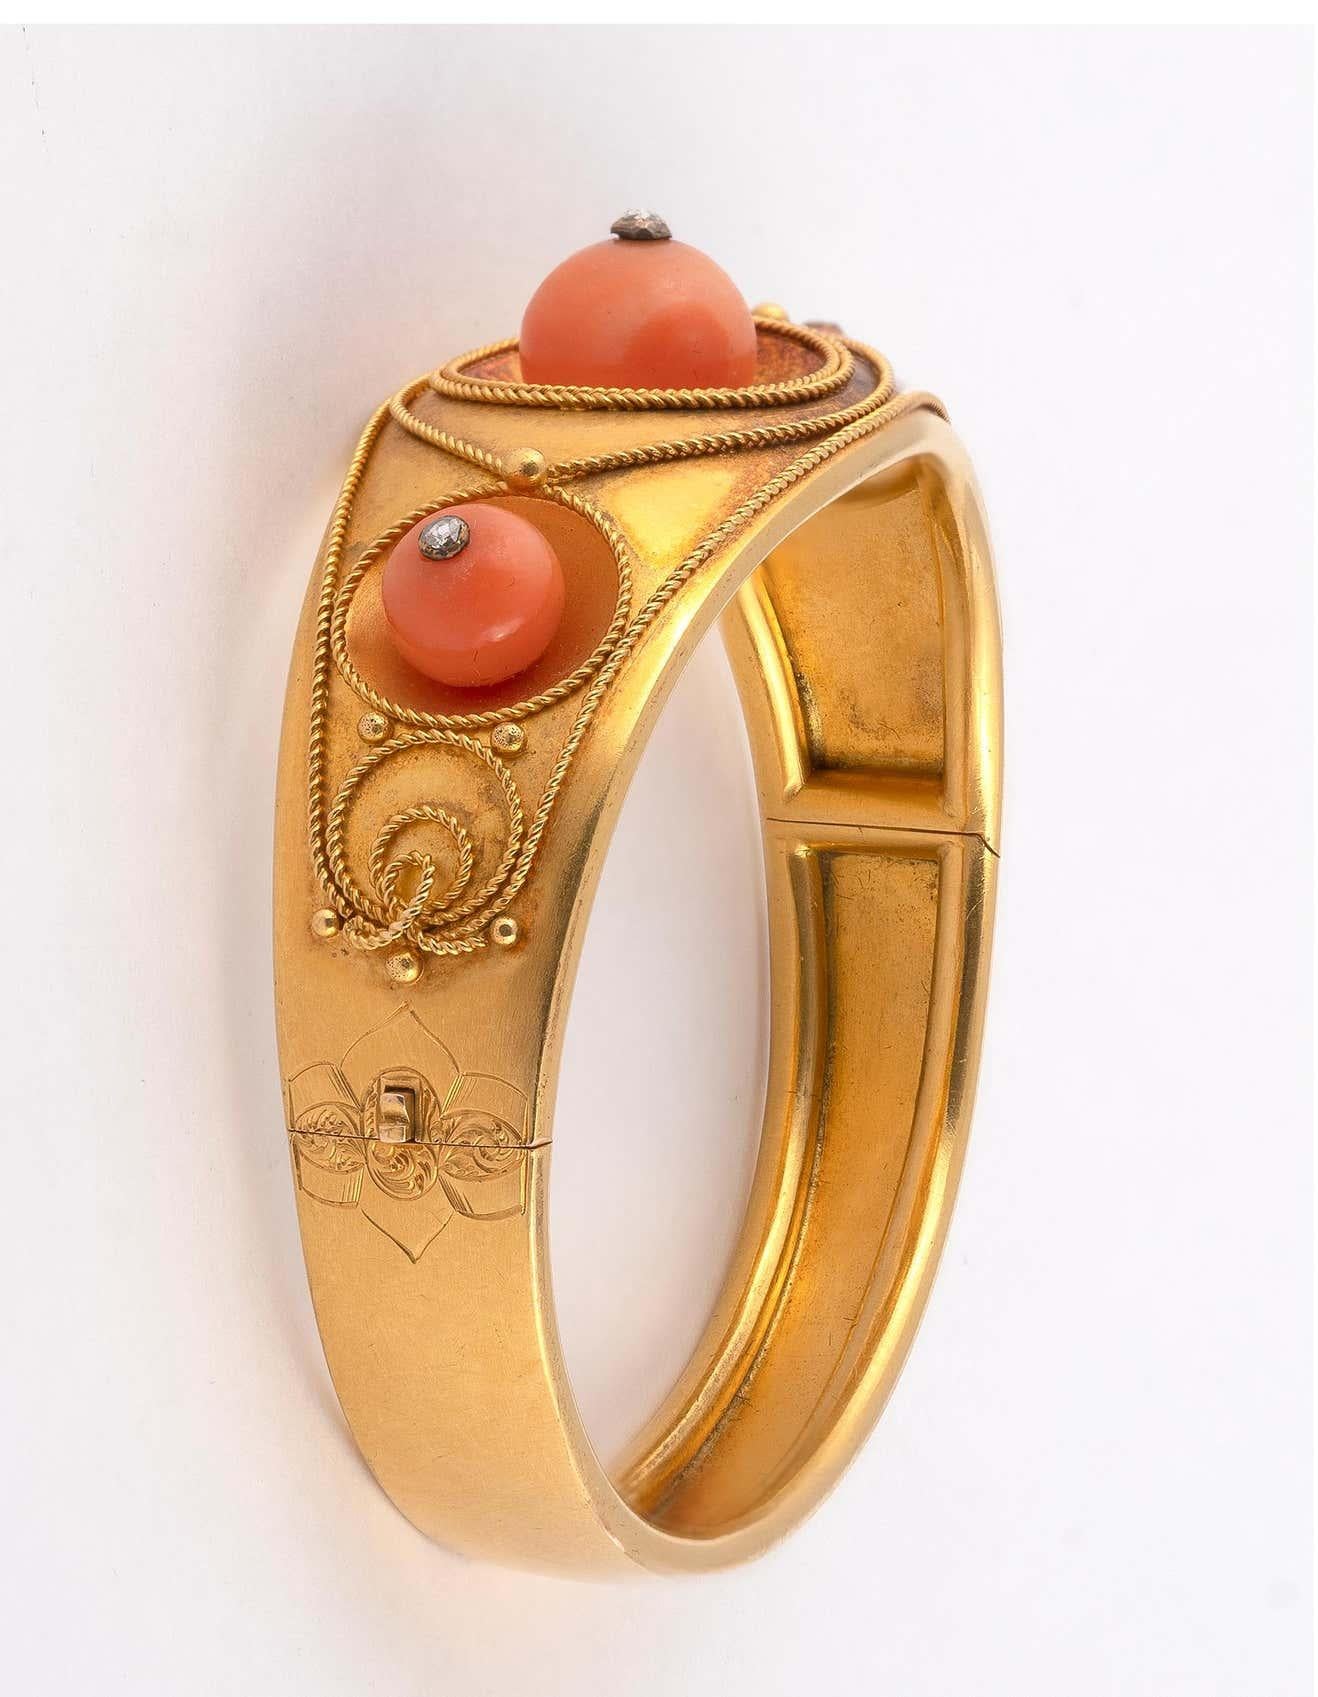 Rigid, articulated cuff-type bracelet in yellow gold,set with three corallum pearls topped by a small rose diamond in a filigree setting. English work, circa 1870's.  Total gross weight: 22.95g;  Diam. 5.6 cm